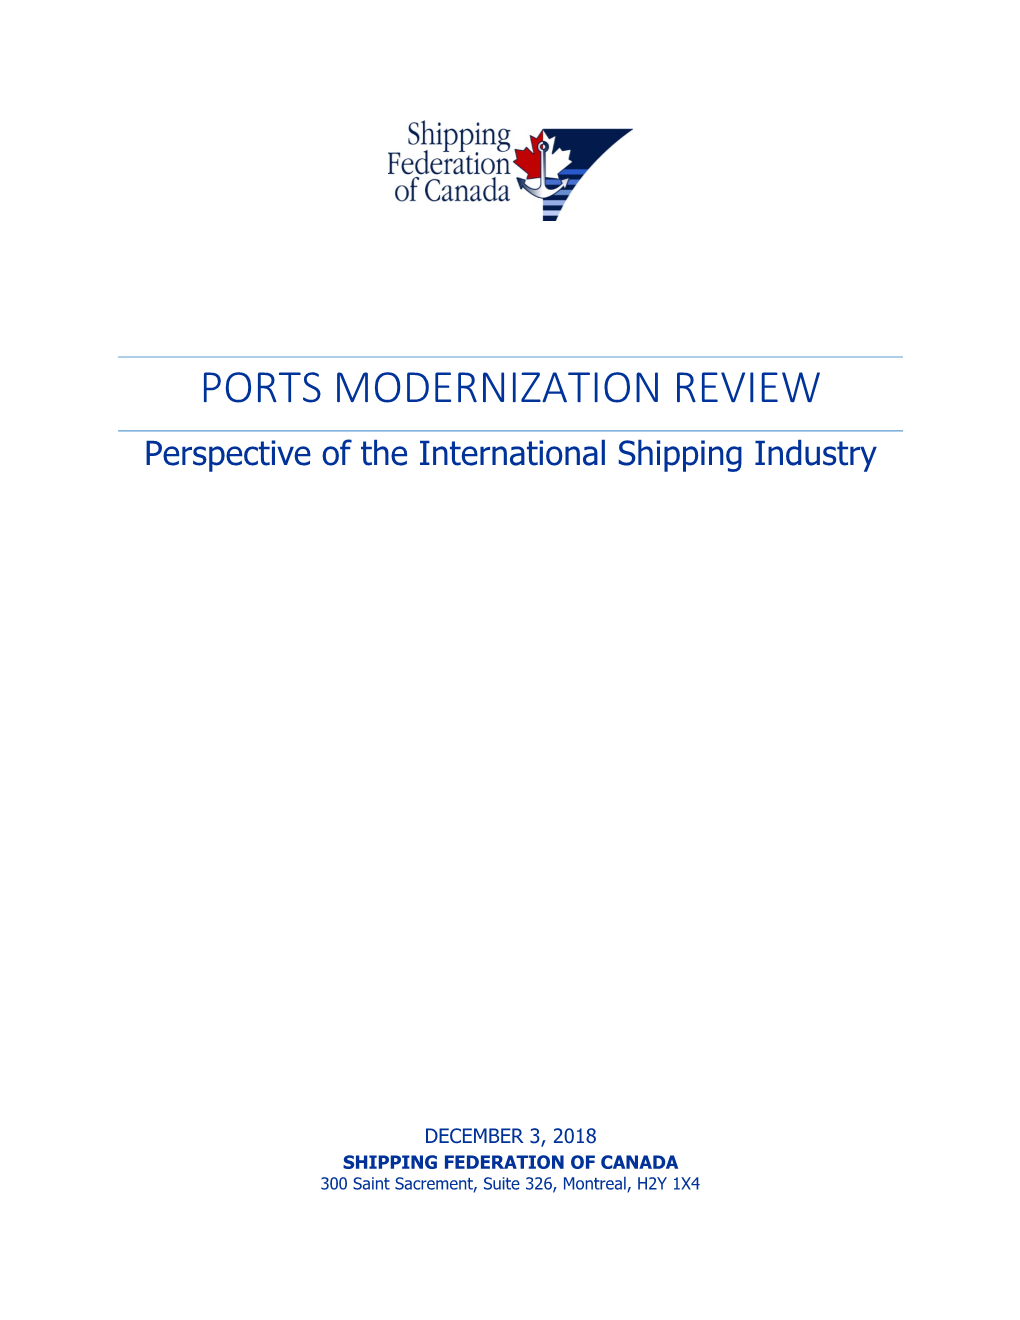 PORTS MODERNIZATION REVIEW Perspective of the International Shipping Industry